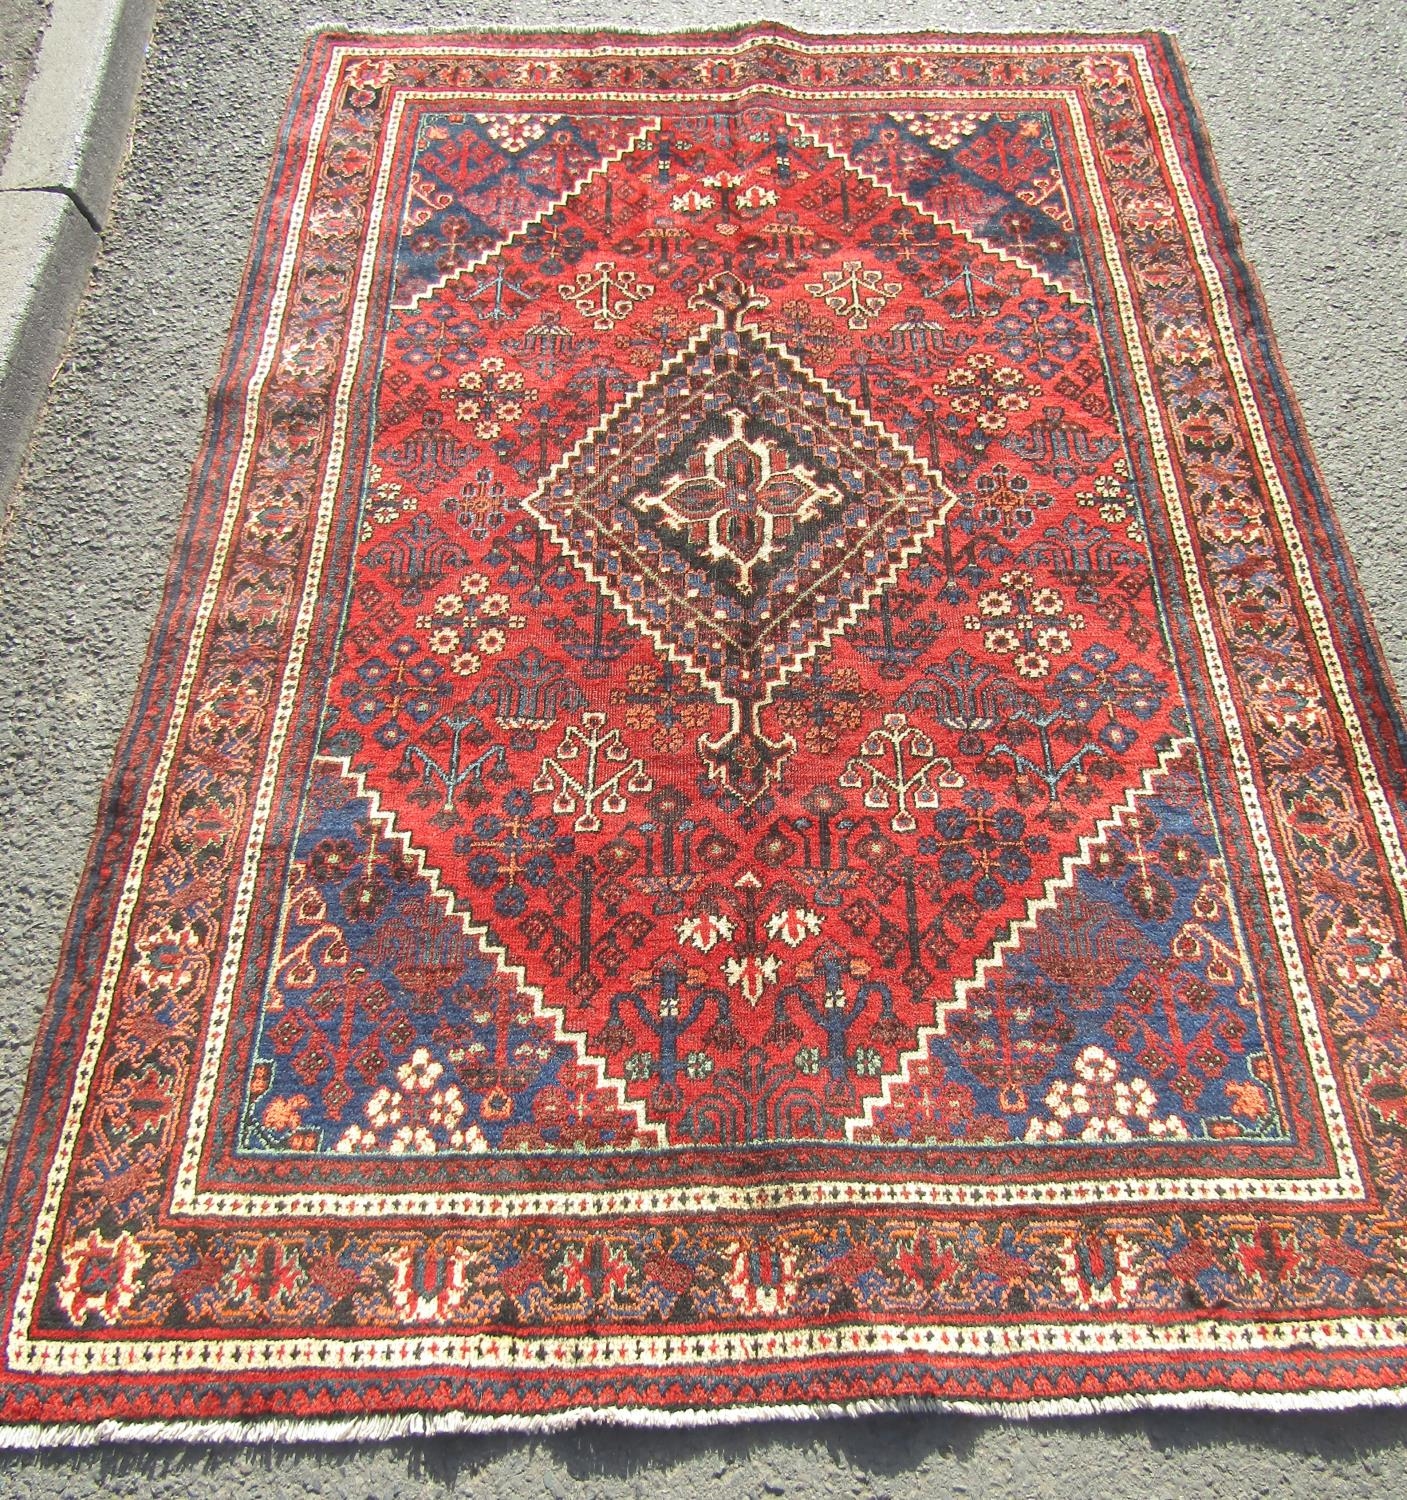 A North West Persian Josheghan rug with central diamond medallion and repeated floral patterns in